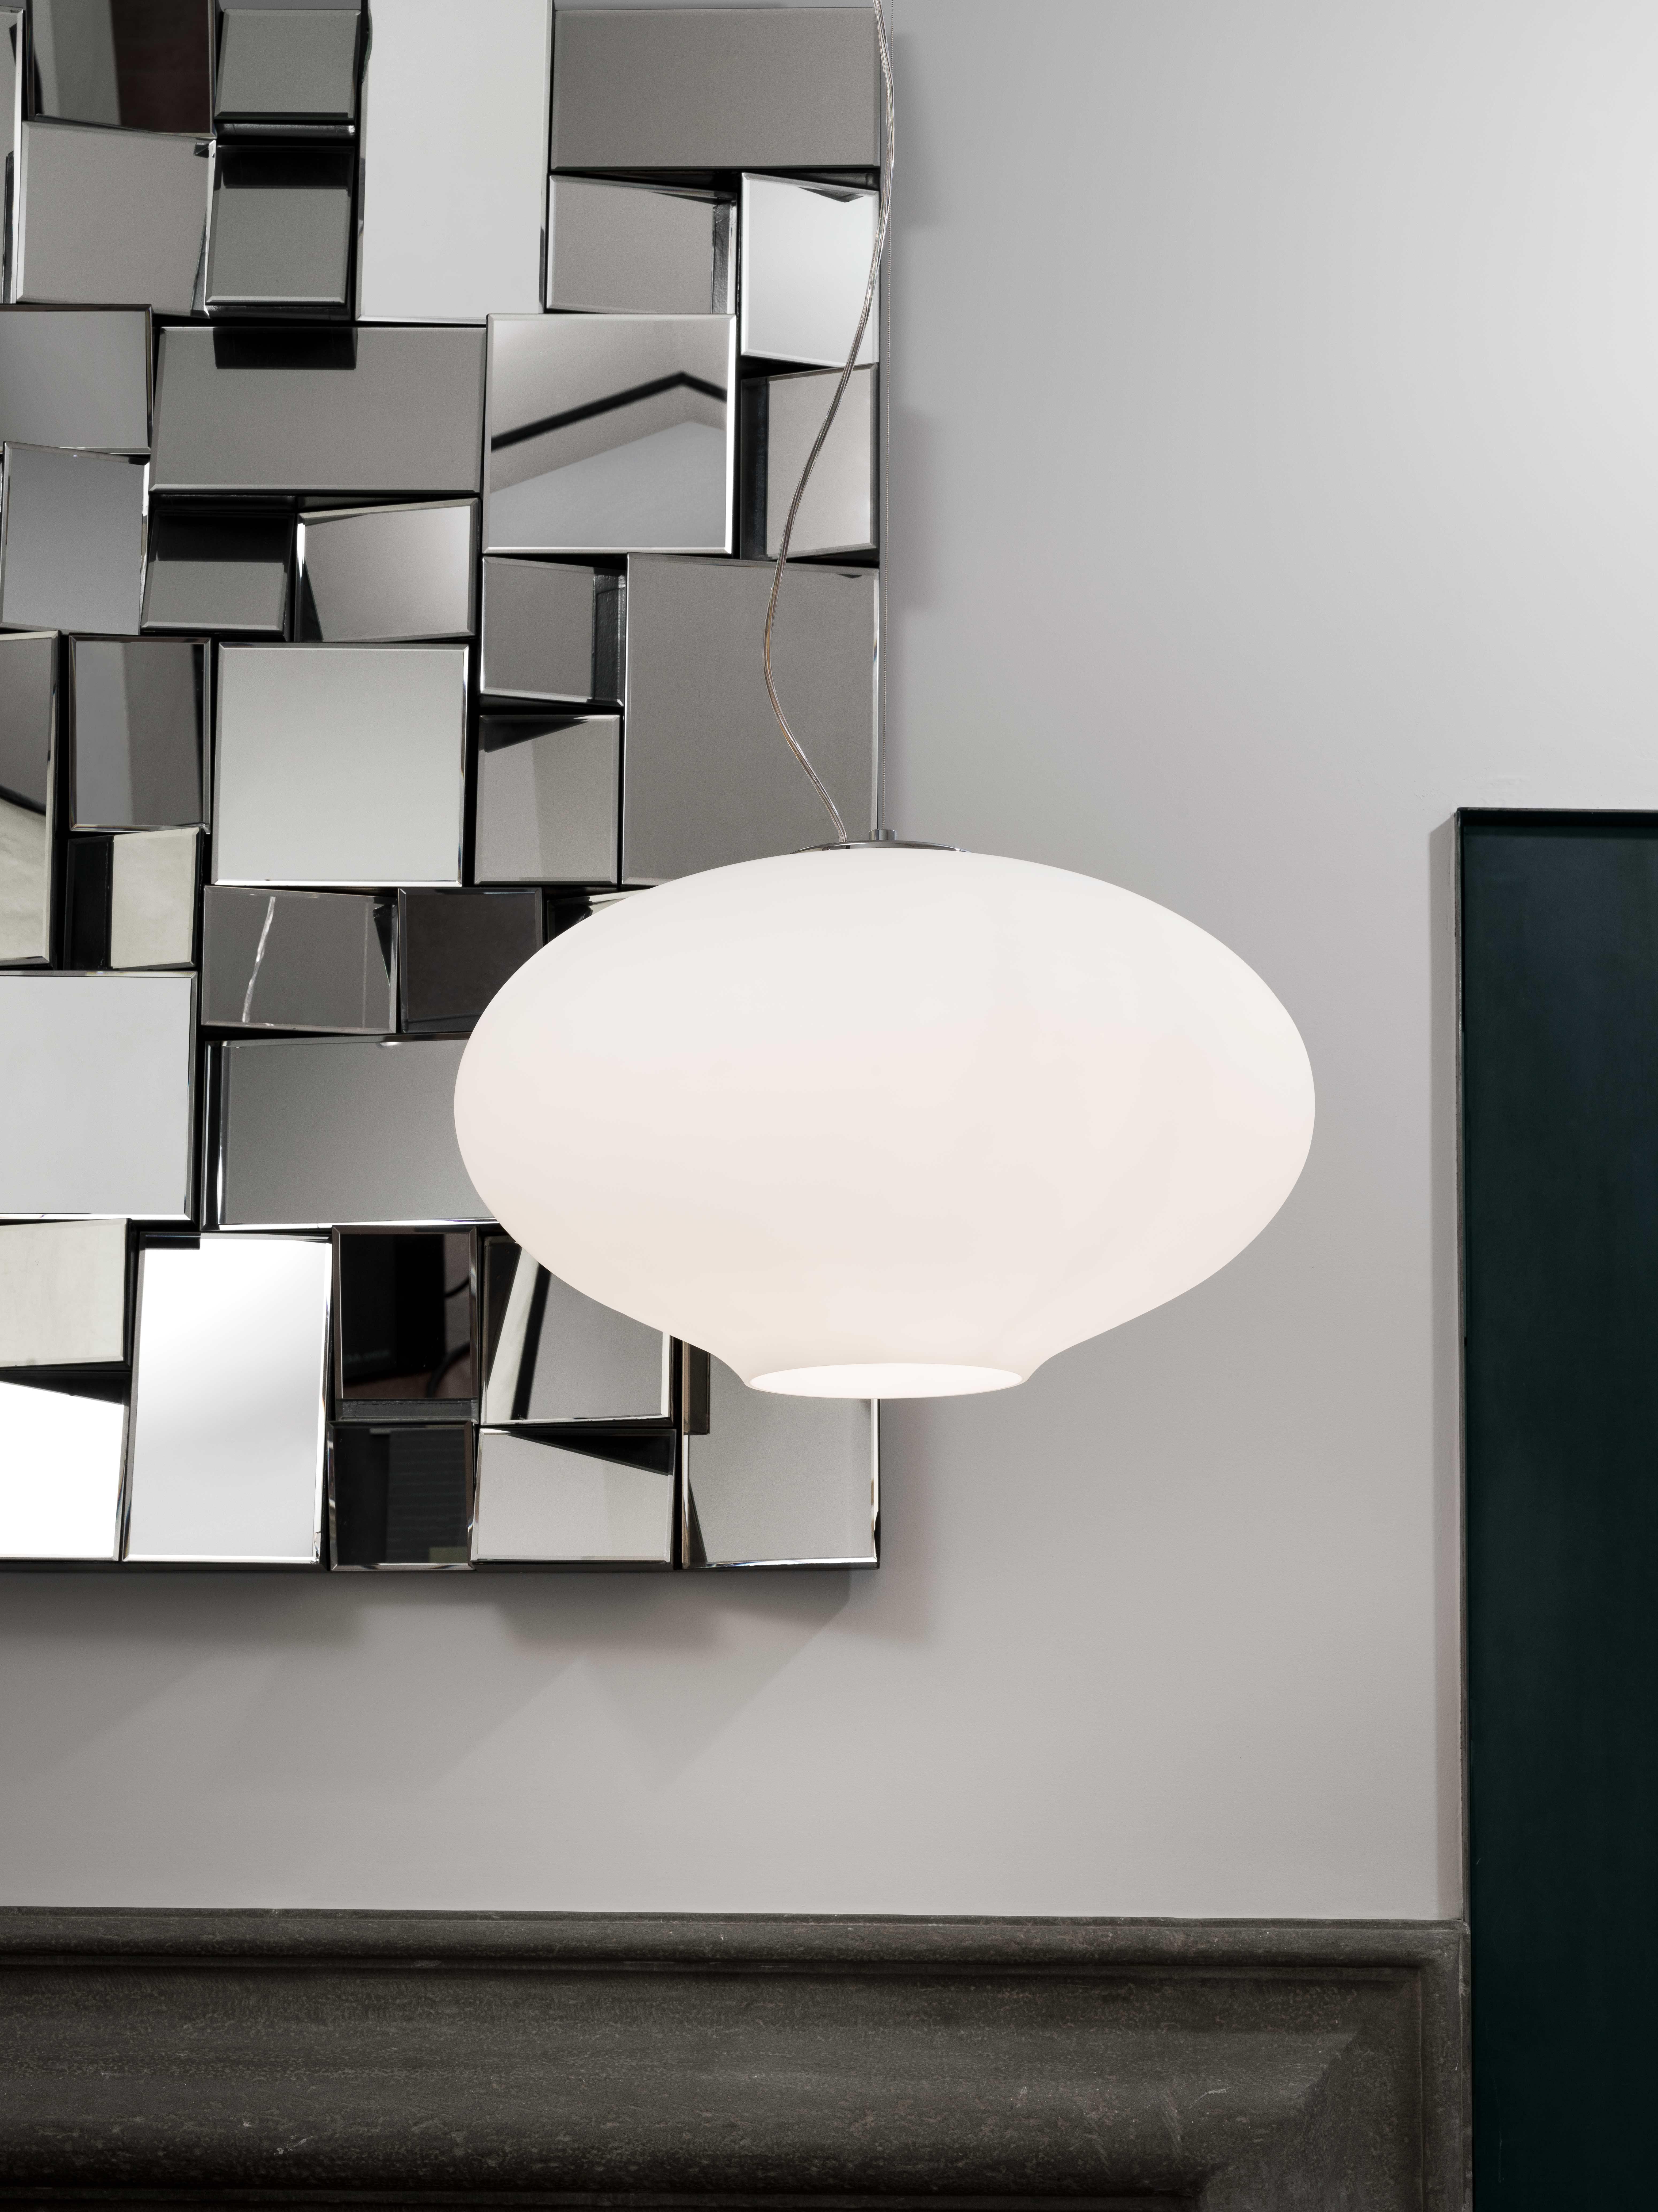 Mario Barbaglia 'Anita' Pendant Lamp in Blown Opal Glass and Chrome for Nemo

This eloquently designed pendant lamp by Mario Barbaglia is executed in triplex blown opal glass and chrome. The pendant's oval shape features a slight compression which